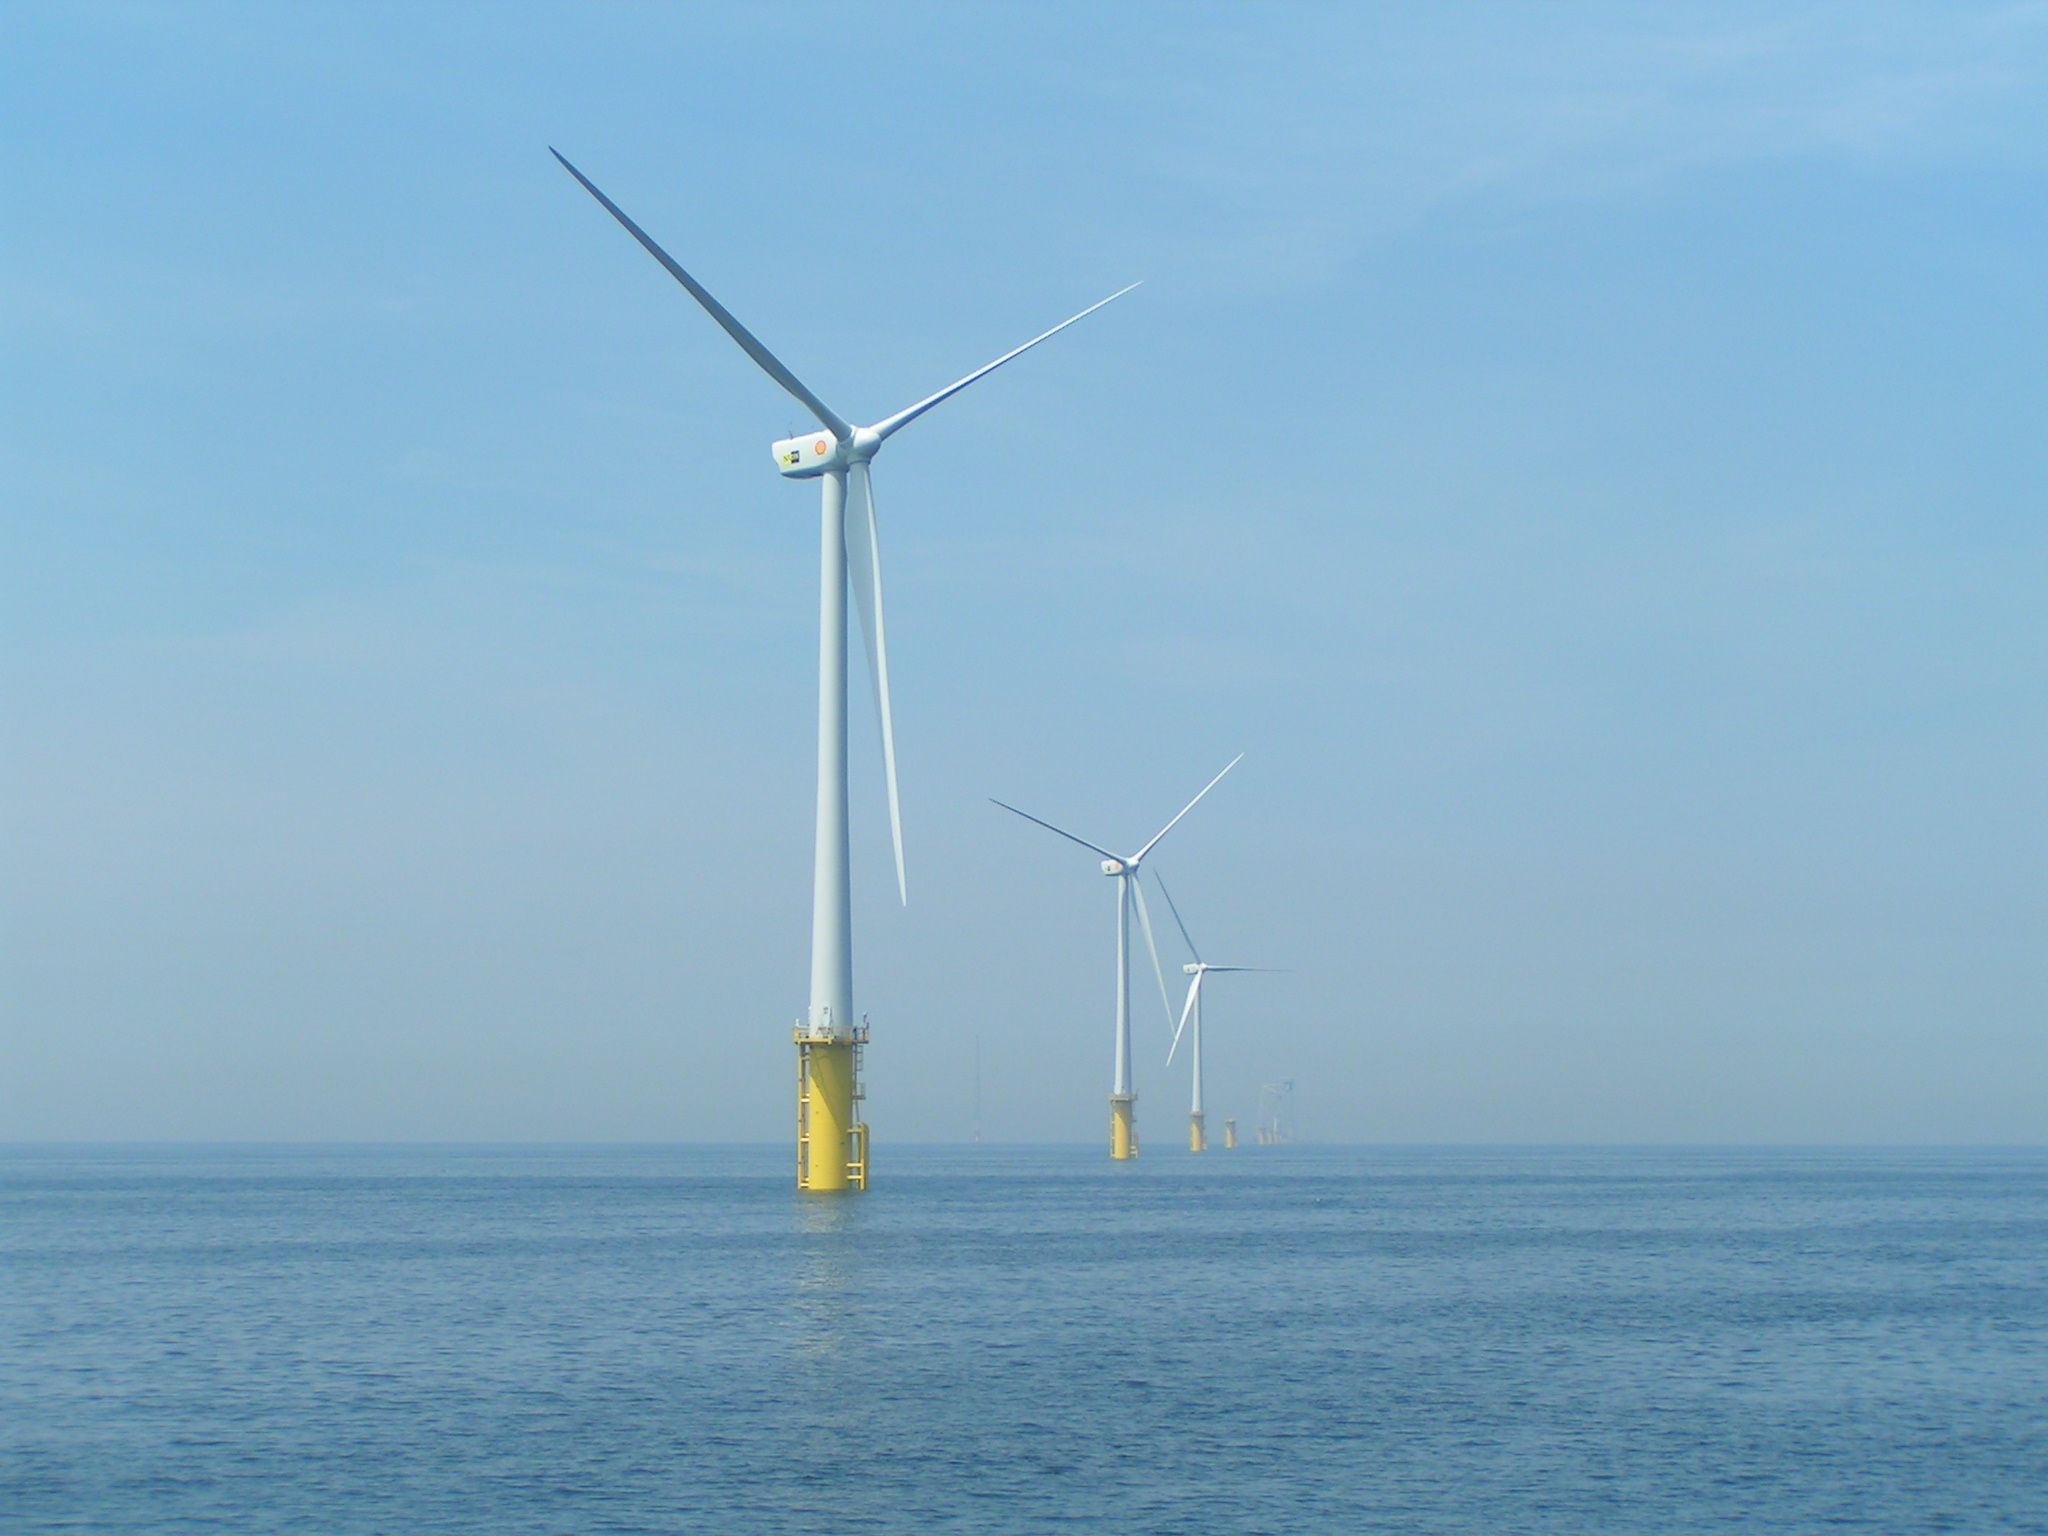 Offshore wind energy entails ecological risks, but also offers opportunities.